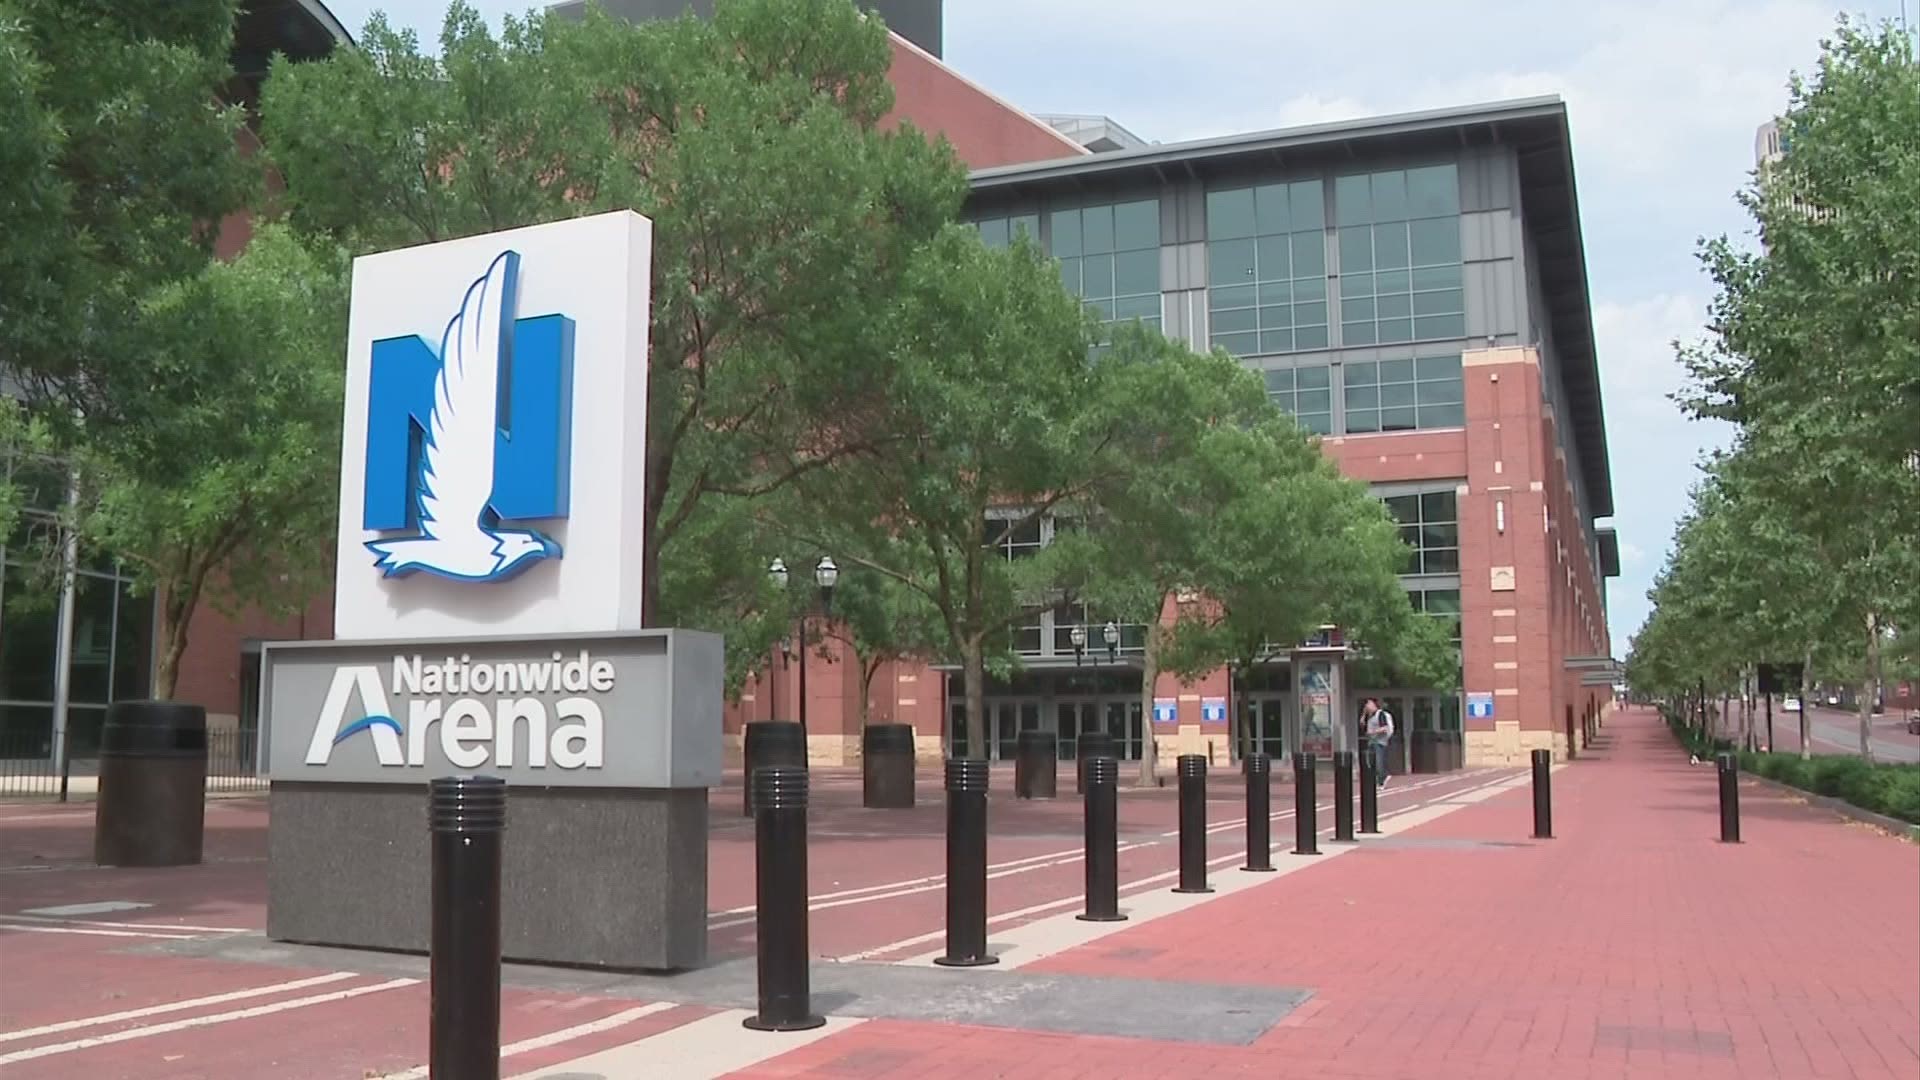 The DORA will run along Nationwide Boulevard and include Nationwide Arena, Huntington Park, Lower.com Field and some surrounding areas.